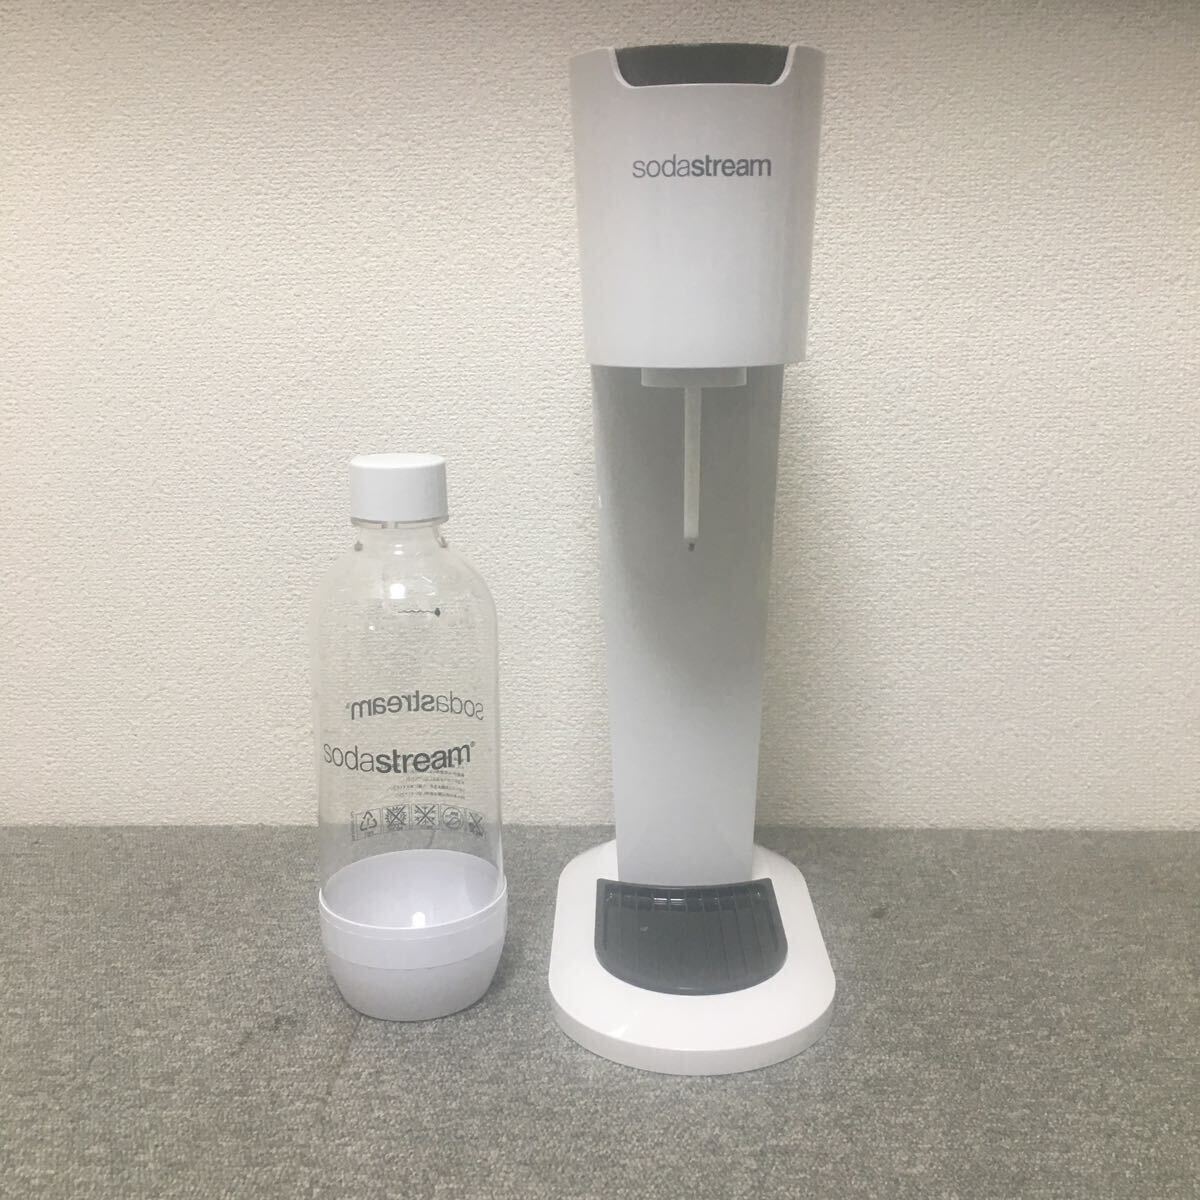  carbonated water Manufacturers sodastream soda Stream body bottle 